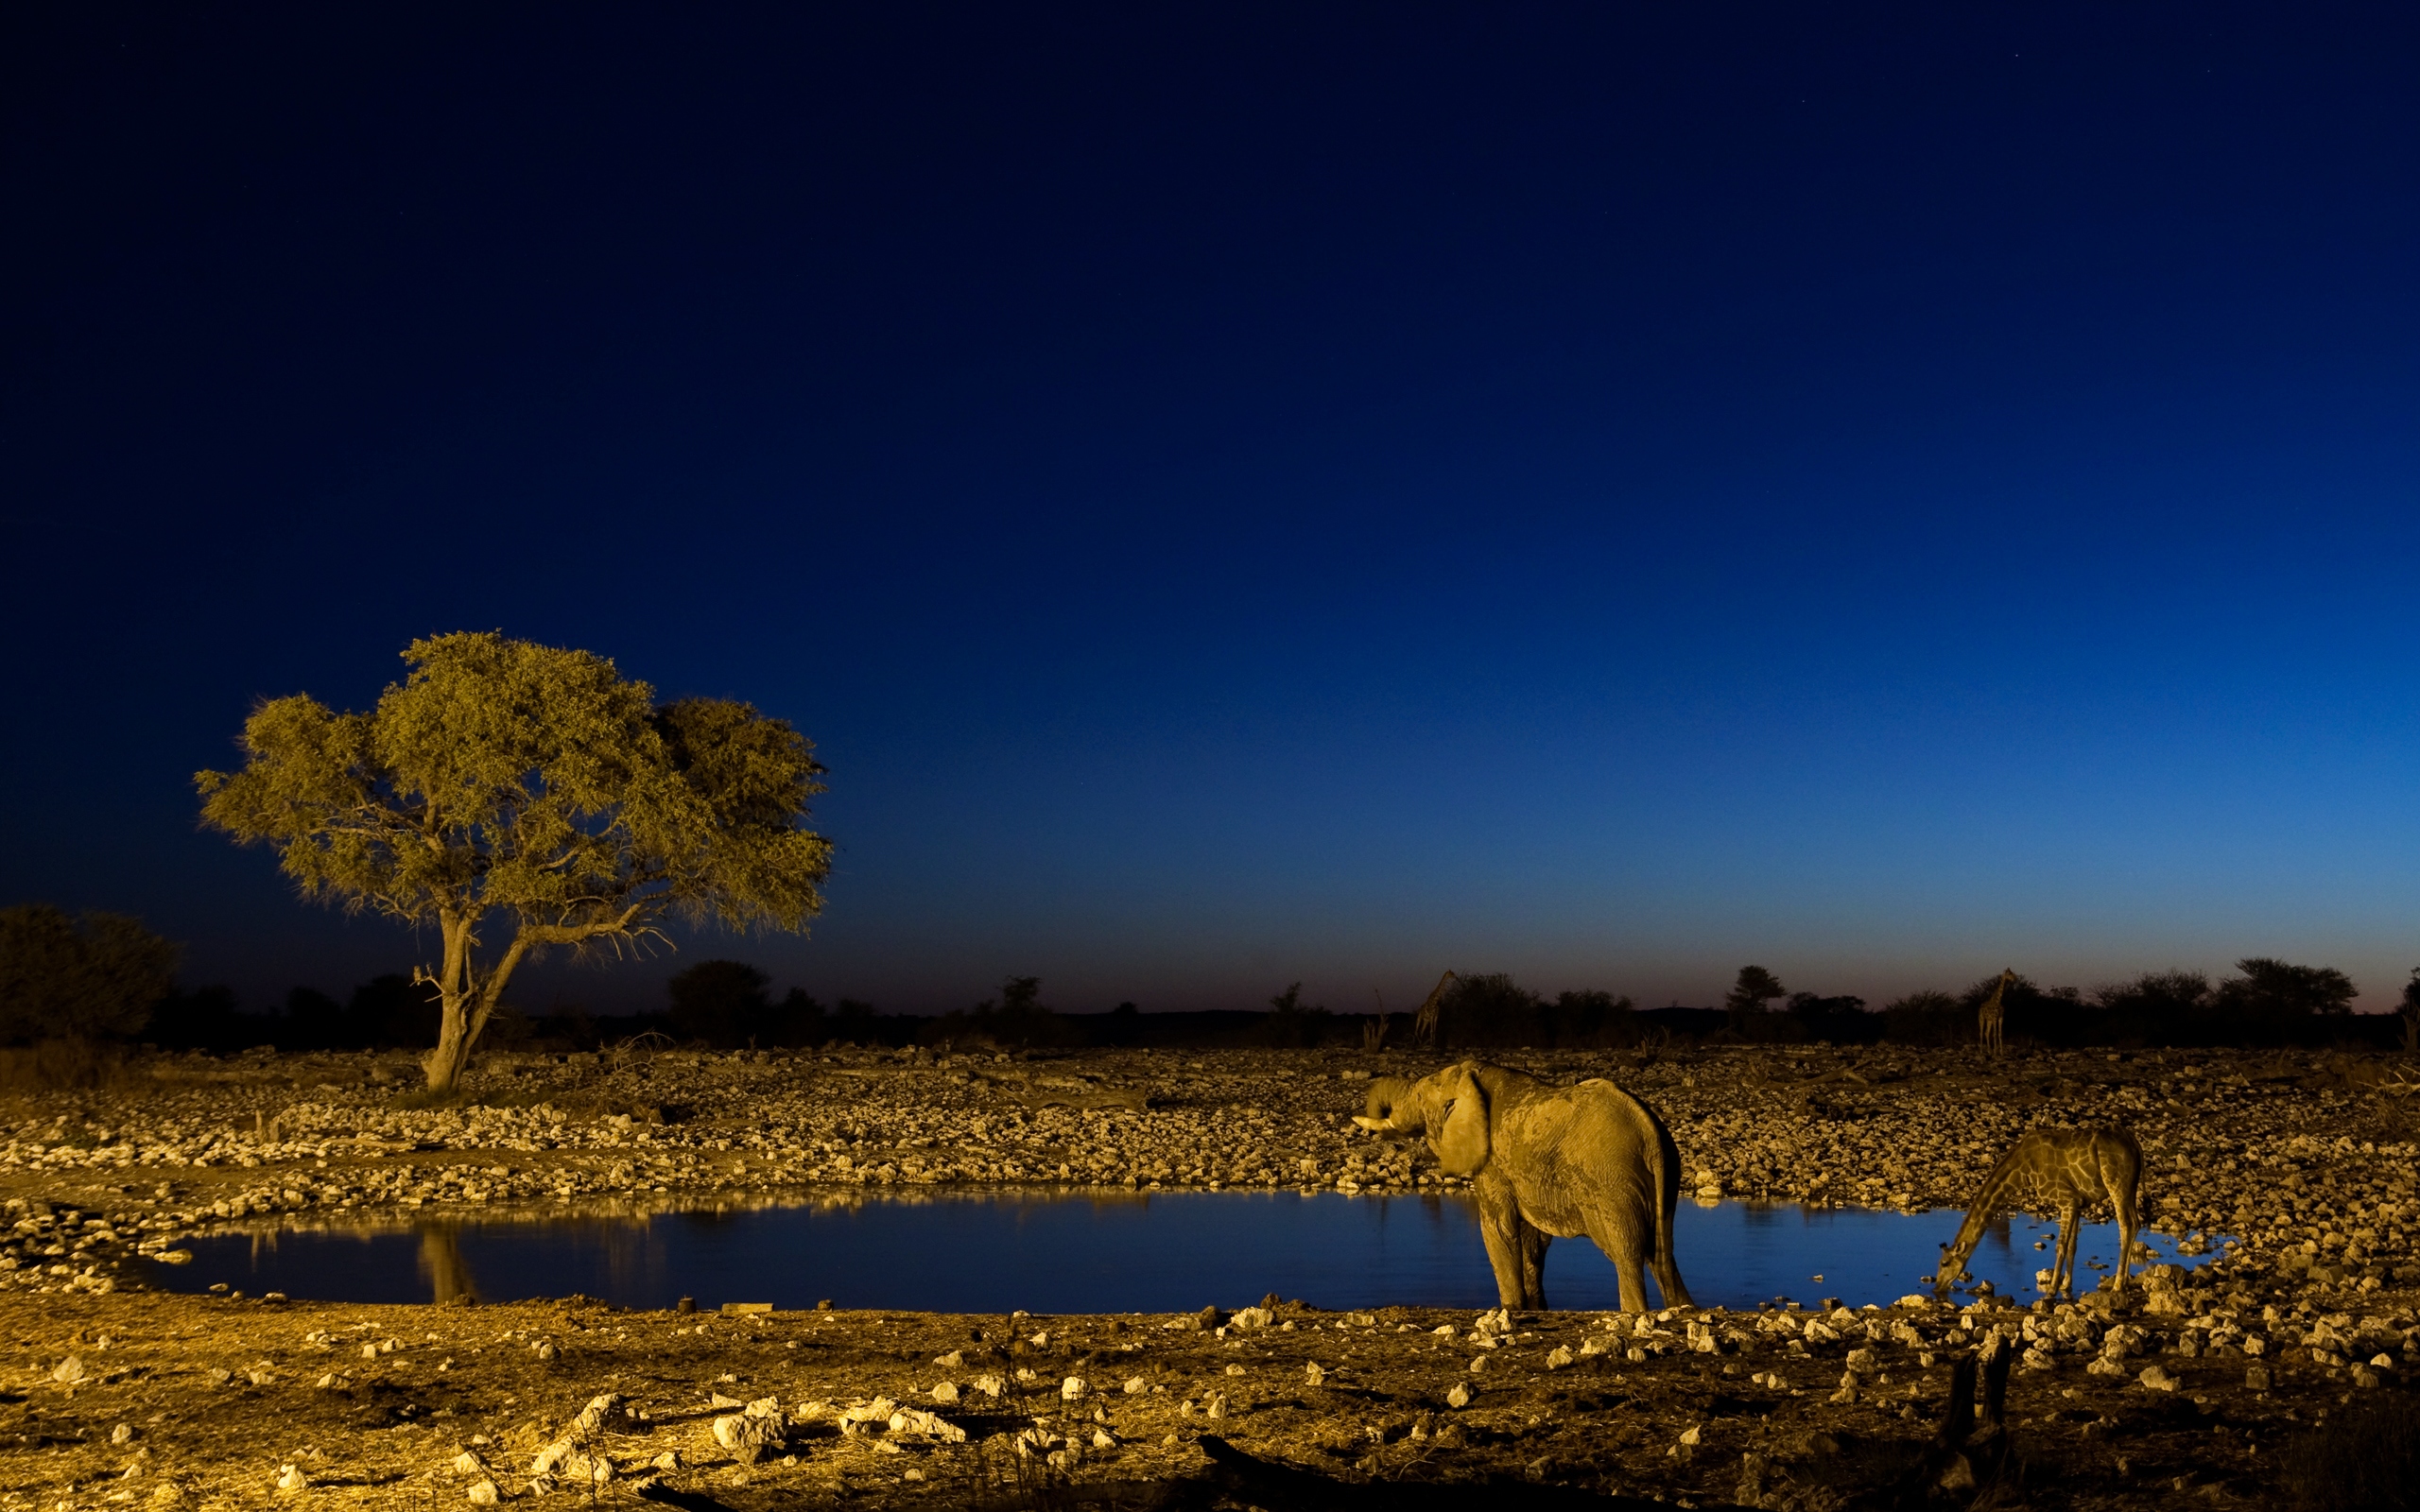 Night In Africa Wallpaper And Image Pictures Photos